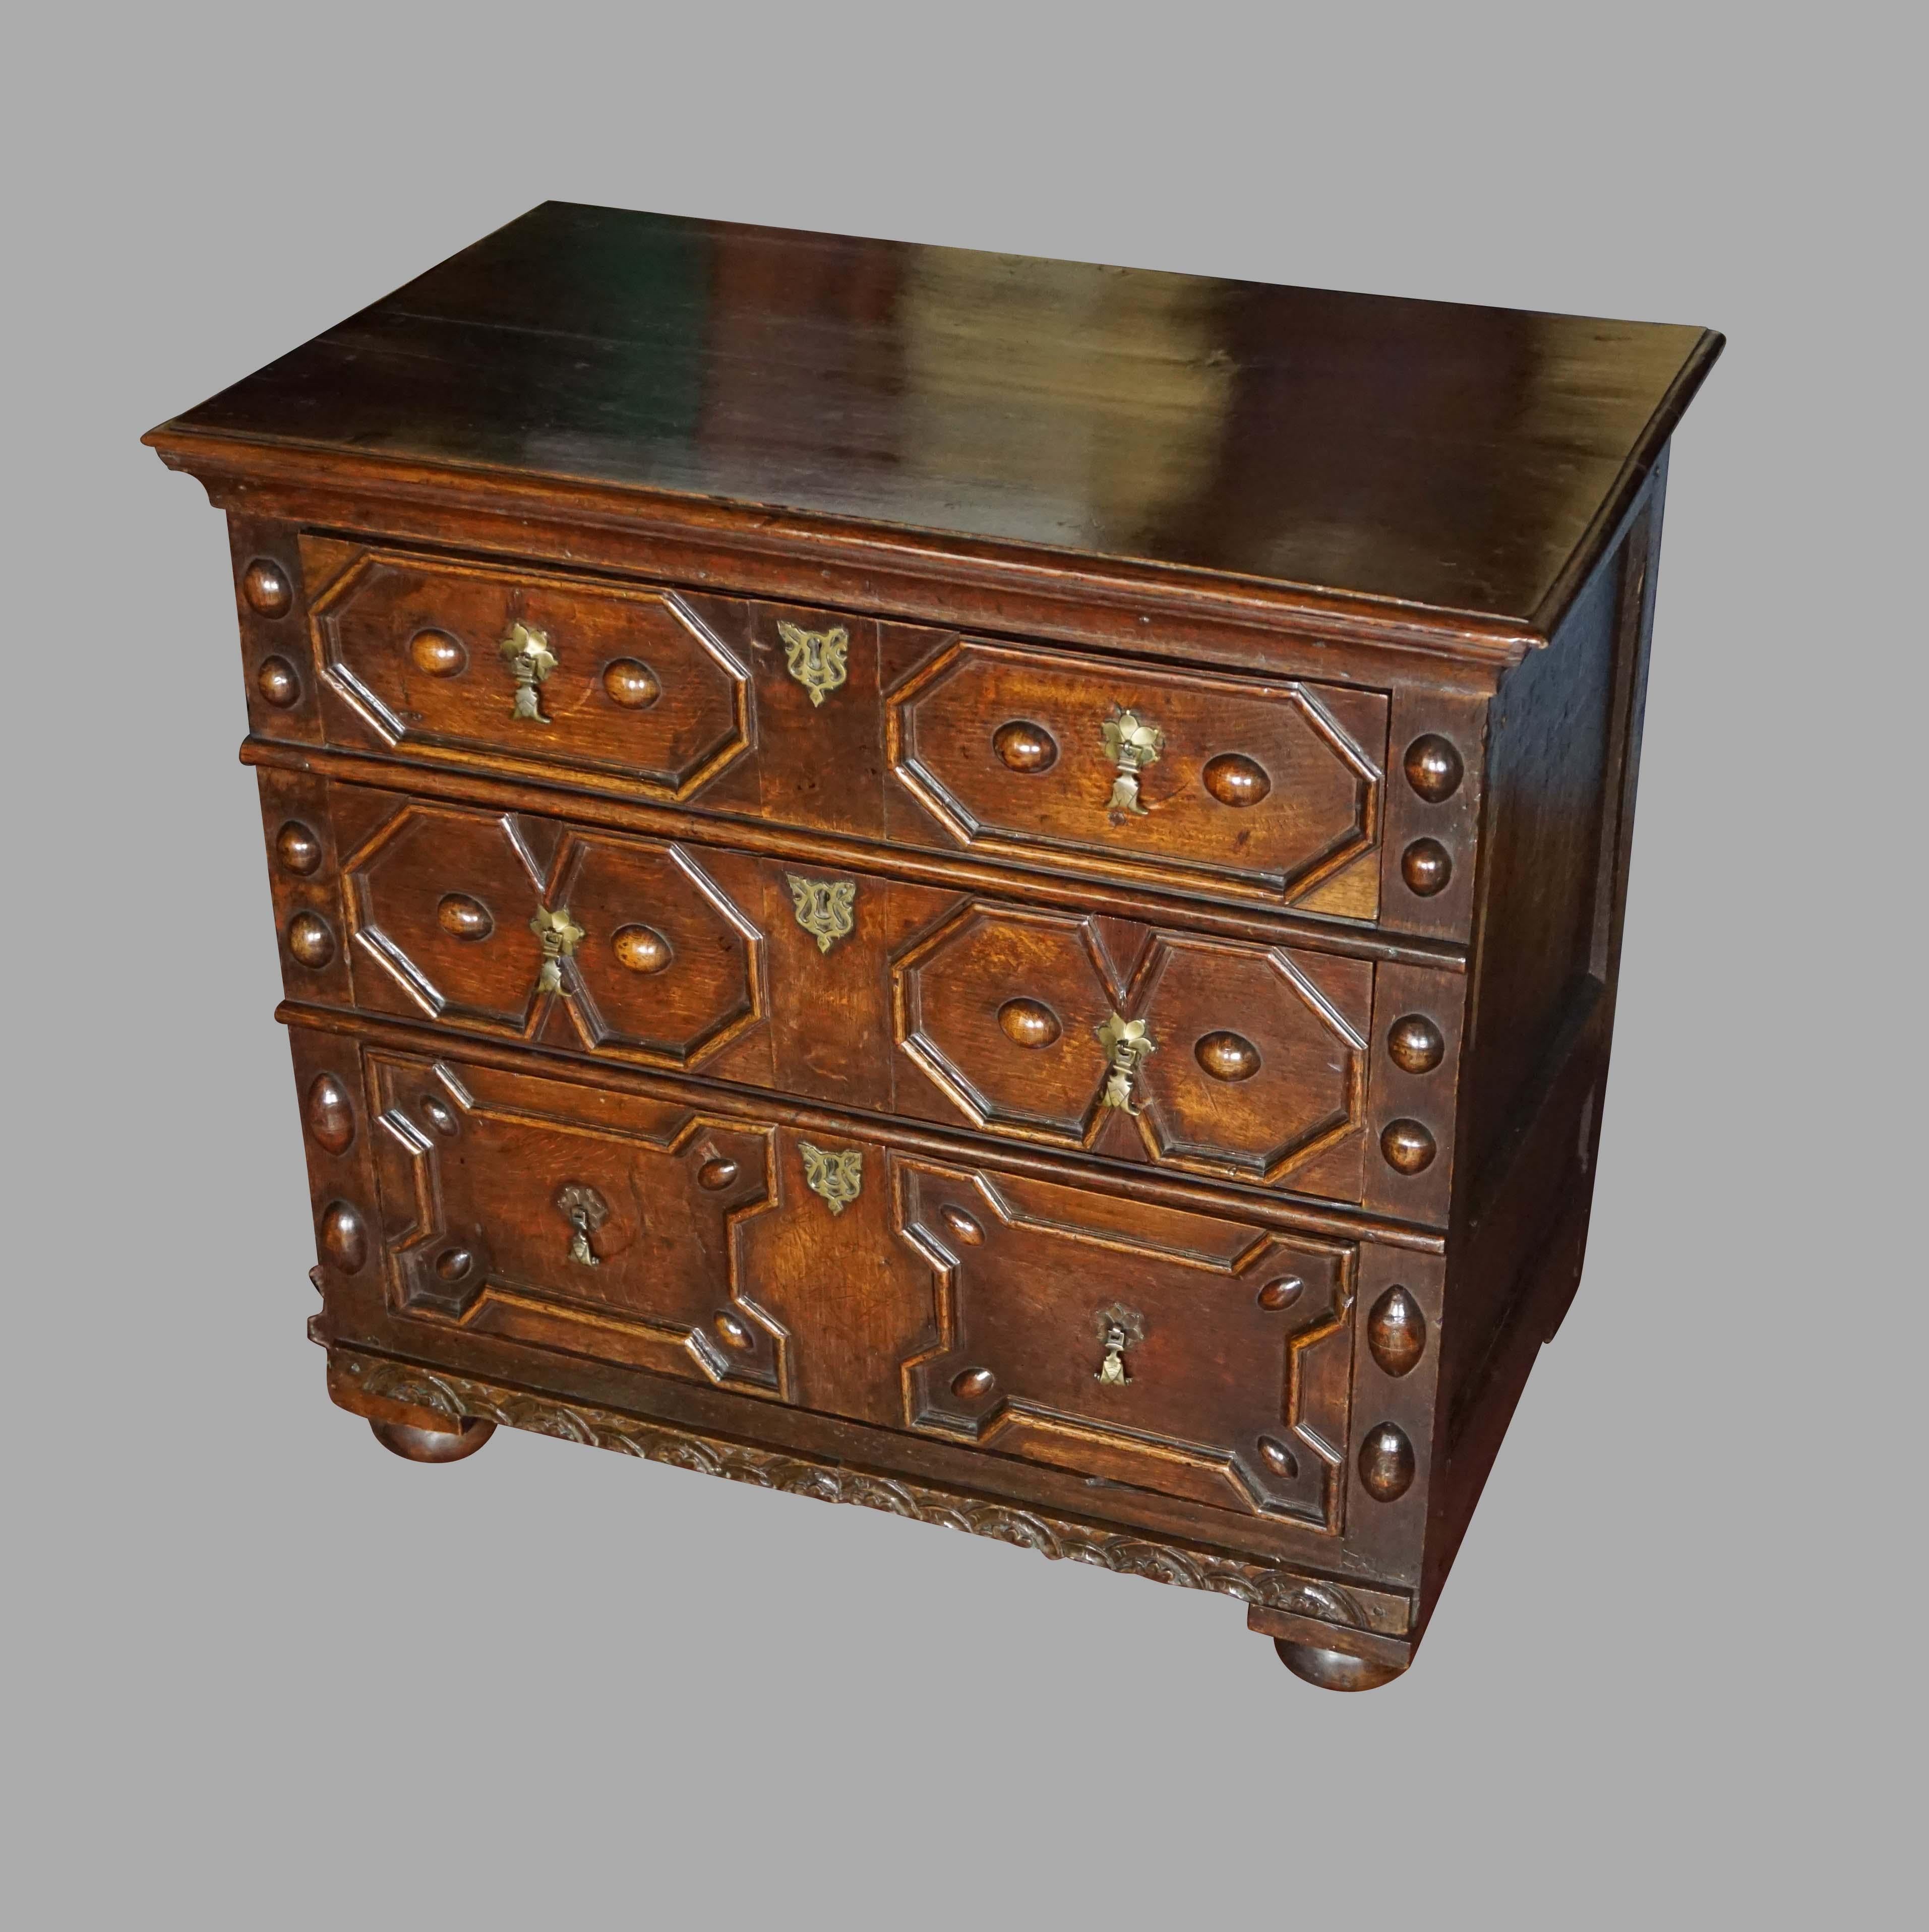 An English Charles II period oak 3-drawer chest, the top with moulded edge over 3 drawers with geometric mitre moulded fronts, with brass teardrop pulls and paneled sides resting on replaced bun feet. The drawer sides and bottoms retaining most of